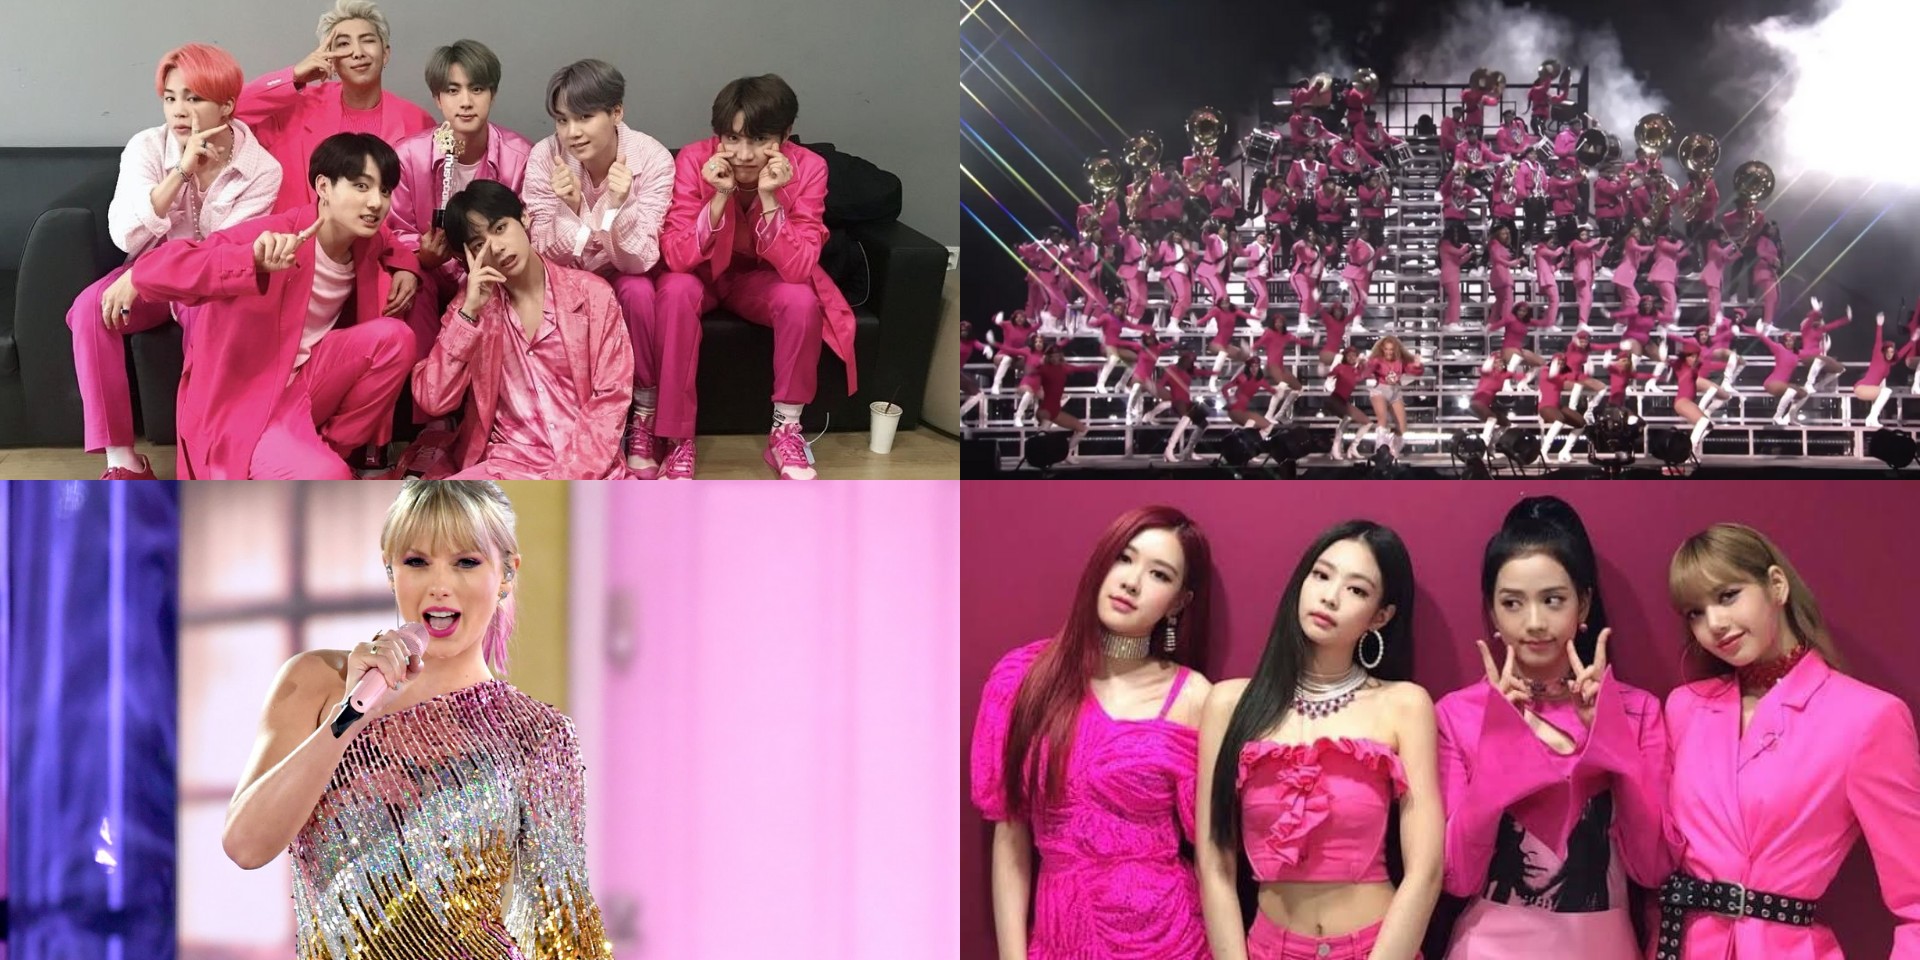 Filipino music fans paint Twitter pink with memes of BTS, Beyoncé, Taylor Swift, BLACKPINK, and more